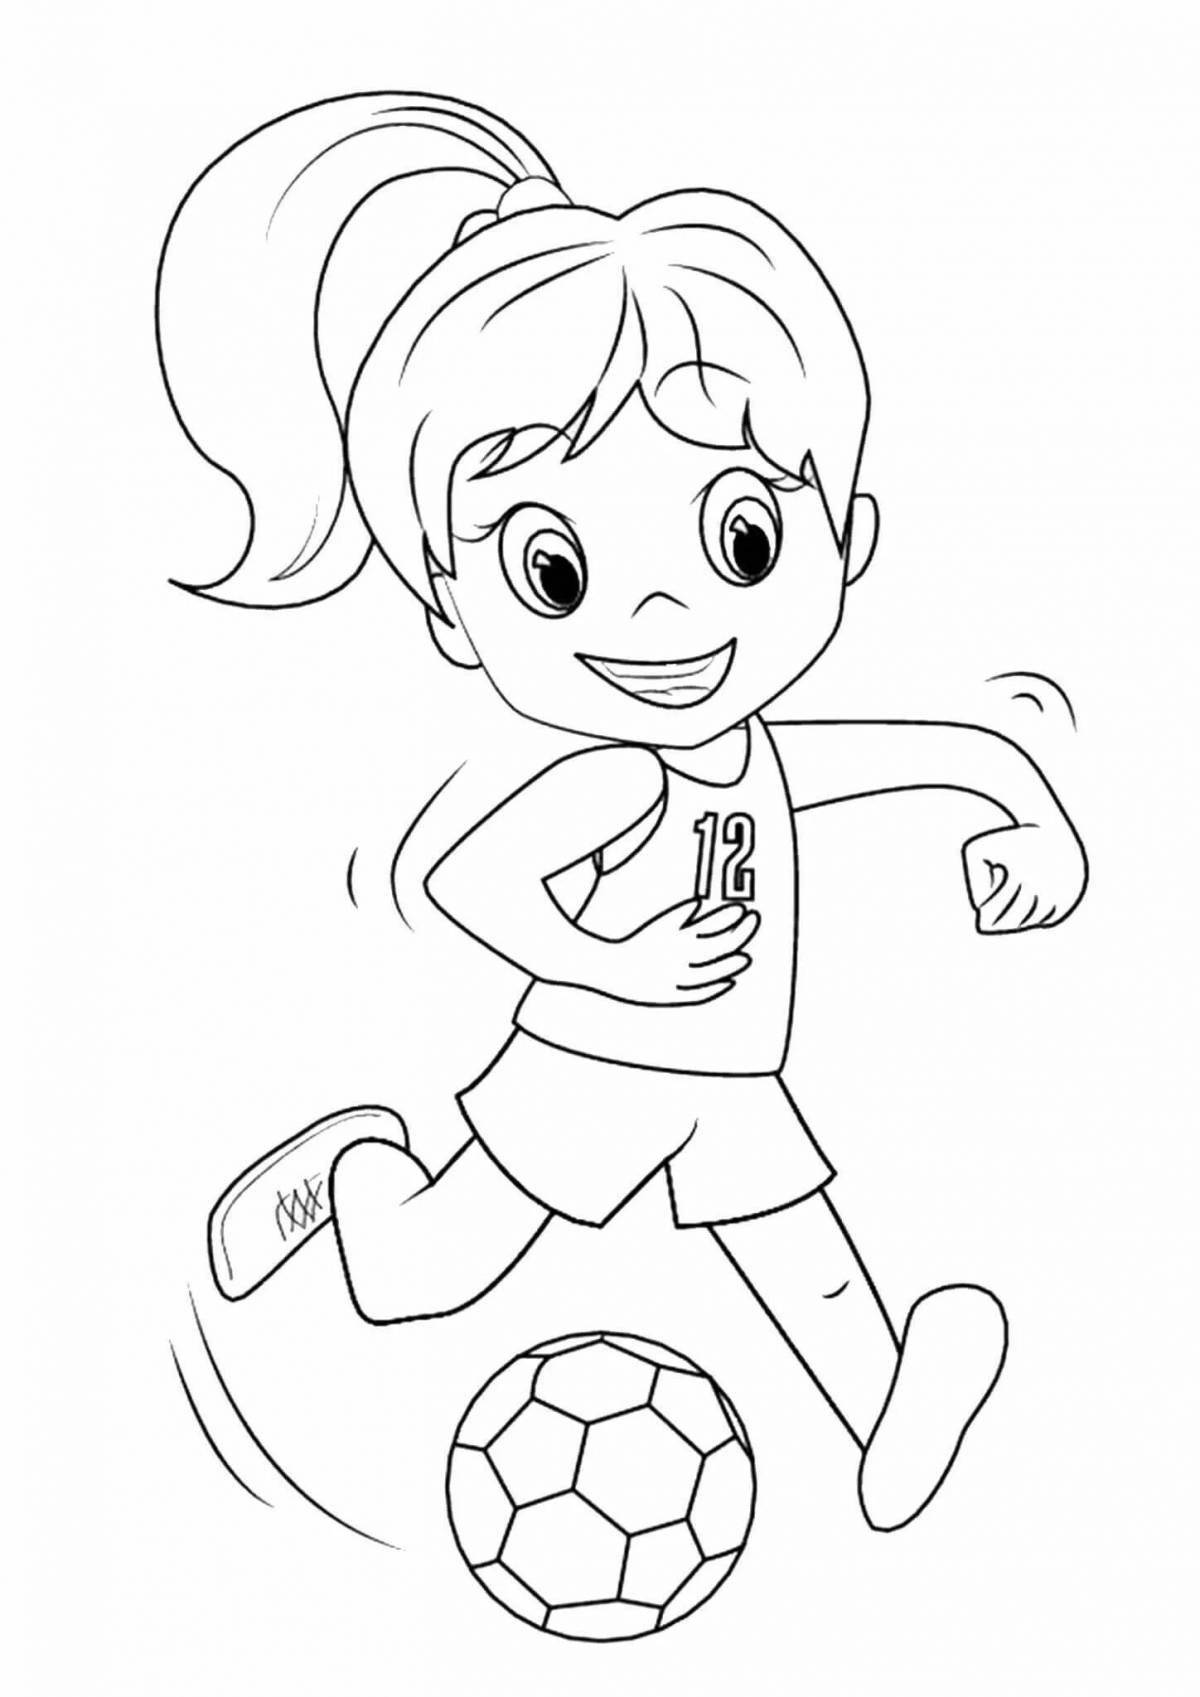 Glamorous sports coloring book for 4-5 year olds